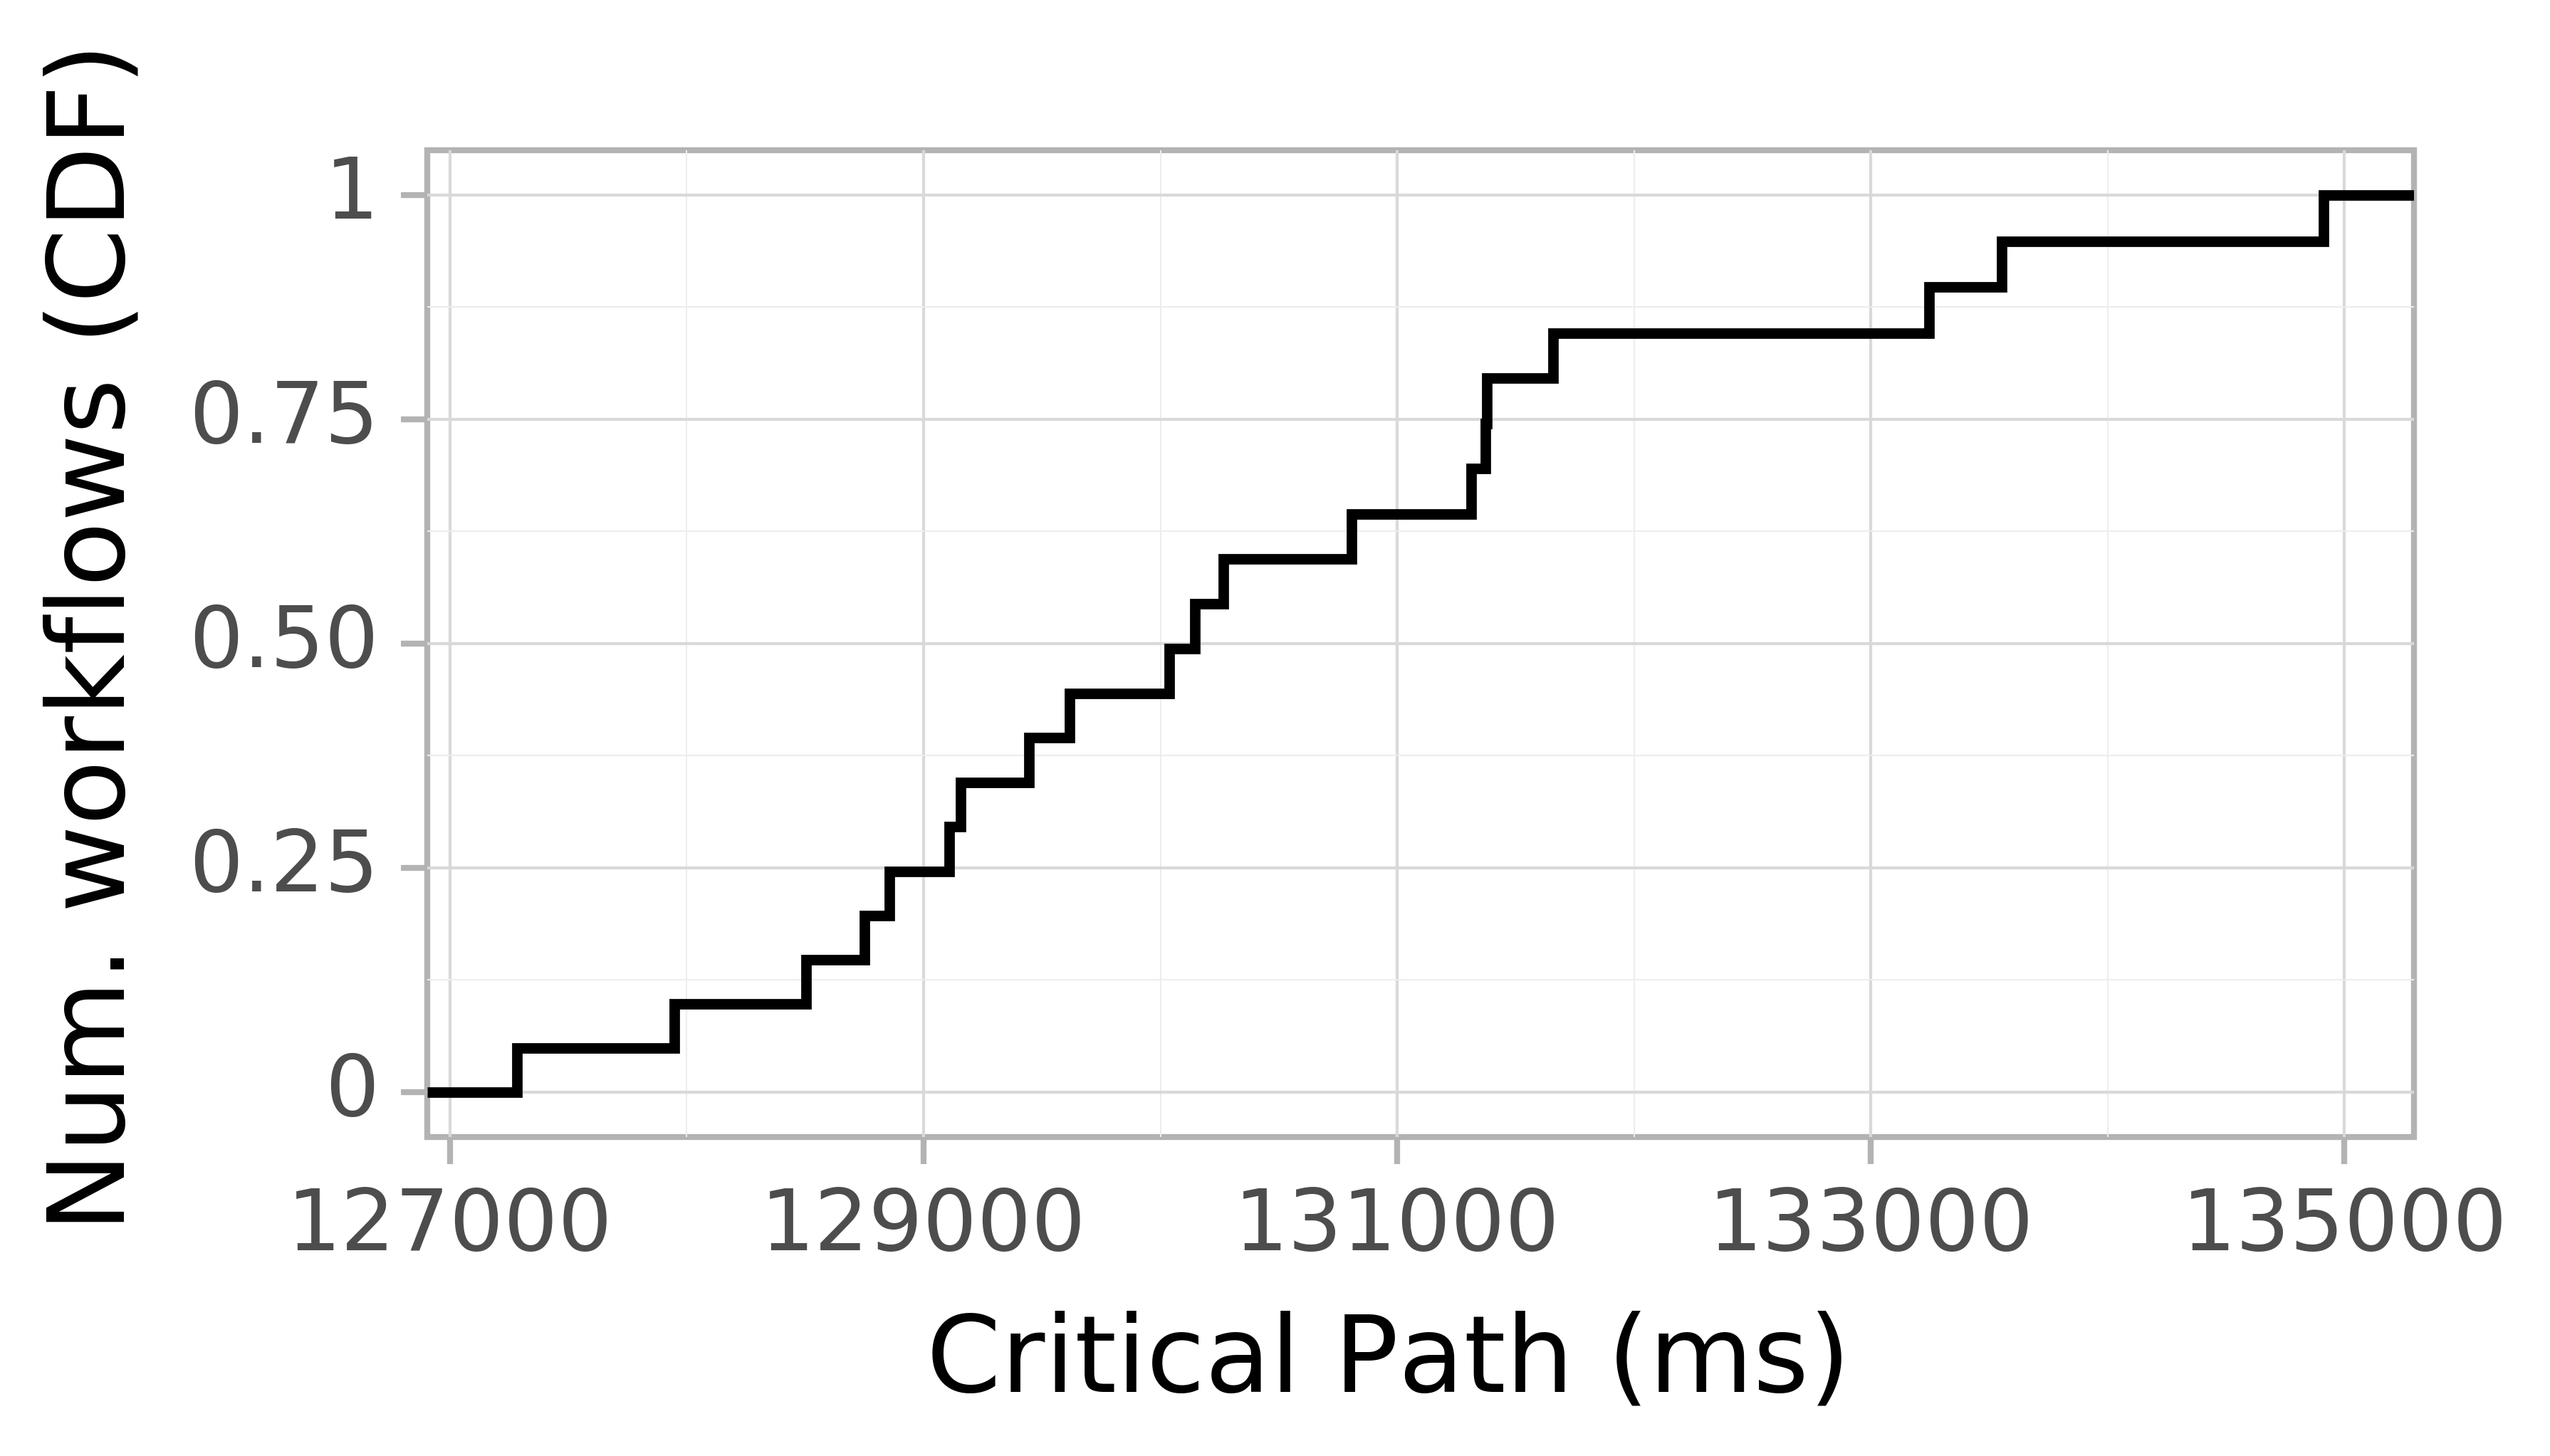 Job runtime CDF graph for the askalon-new_ee8 trace.